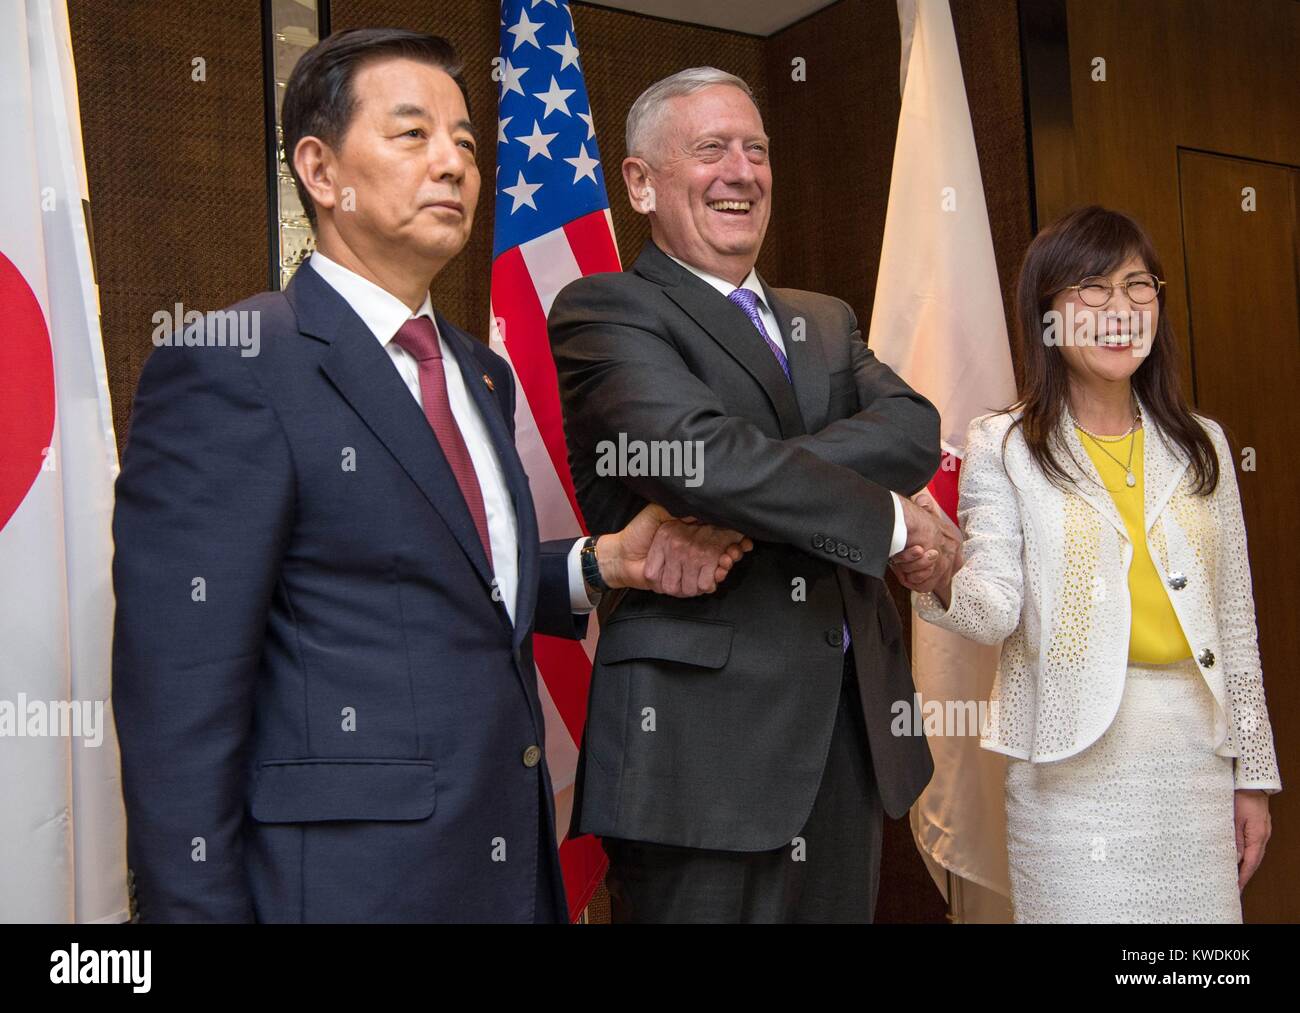 Sec. of Defense Jim Mattis with Defense Ministers of South Korea and Japan in Singapore. June 3, 2017. L-R. Defense Minister Han Min-goo, Sec. Mattis, and Japanese Minister Tomomi Inada (BSLOC 2017 18 132) Stock Photo